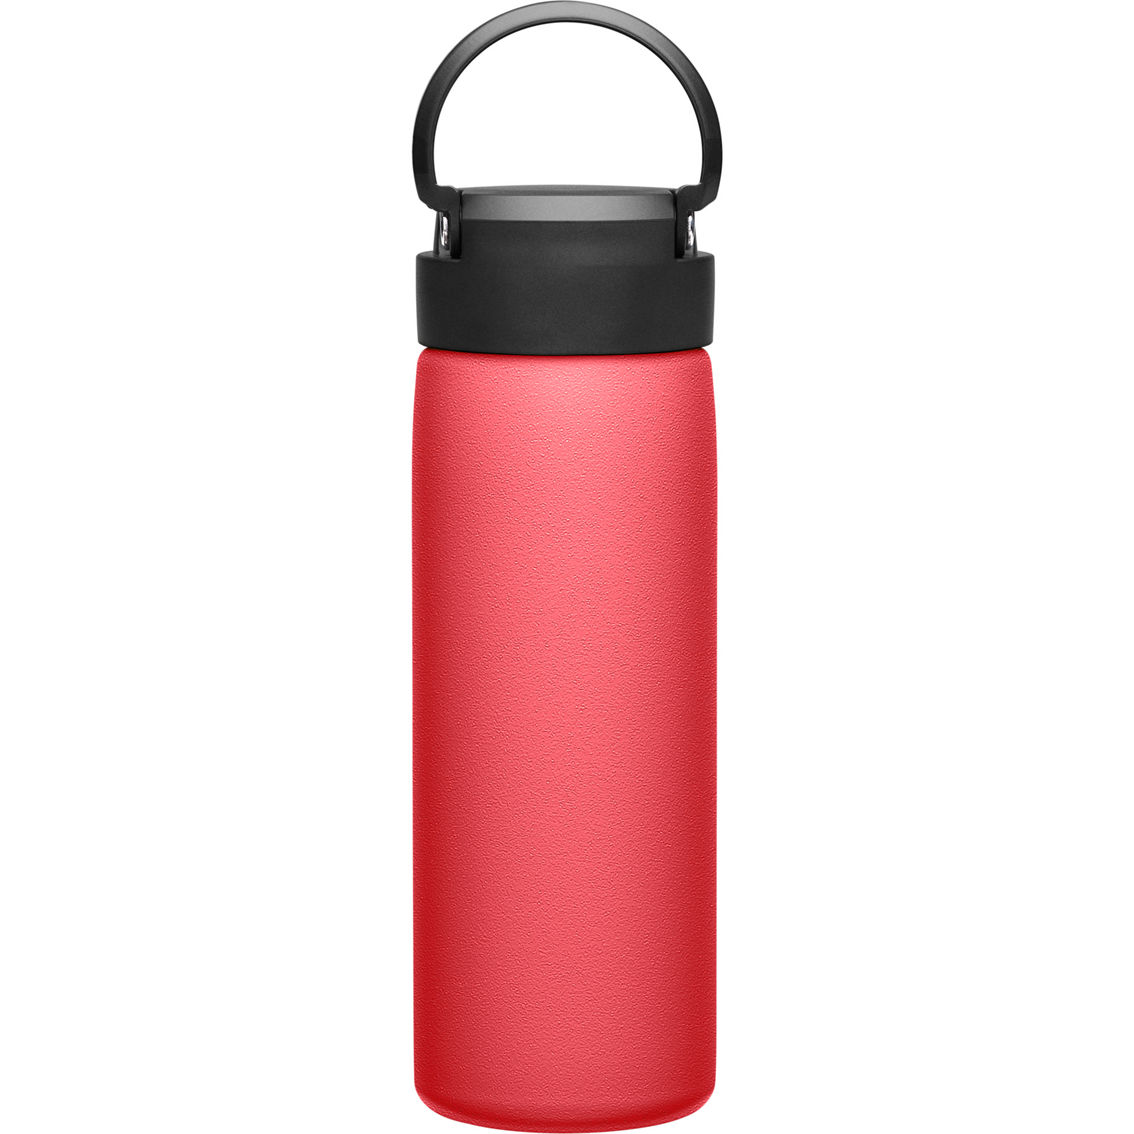 Camelbak Fit Cap Insulated Stainless Steel 20 oz. Water Bottle - Image 2 of 8